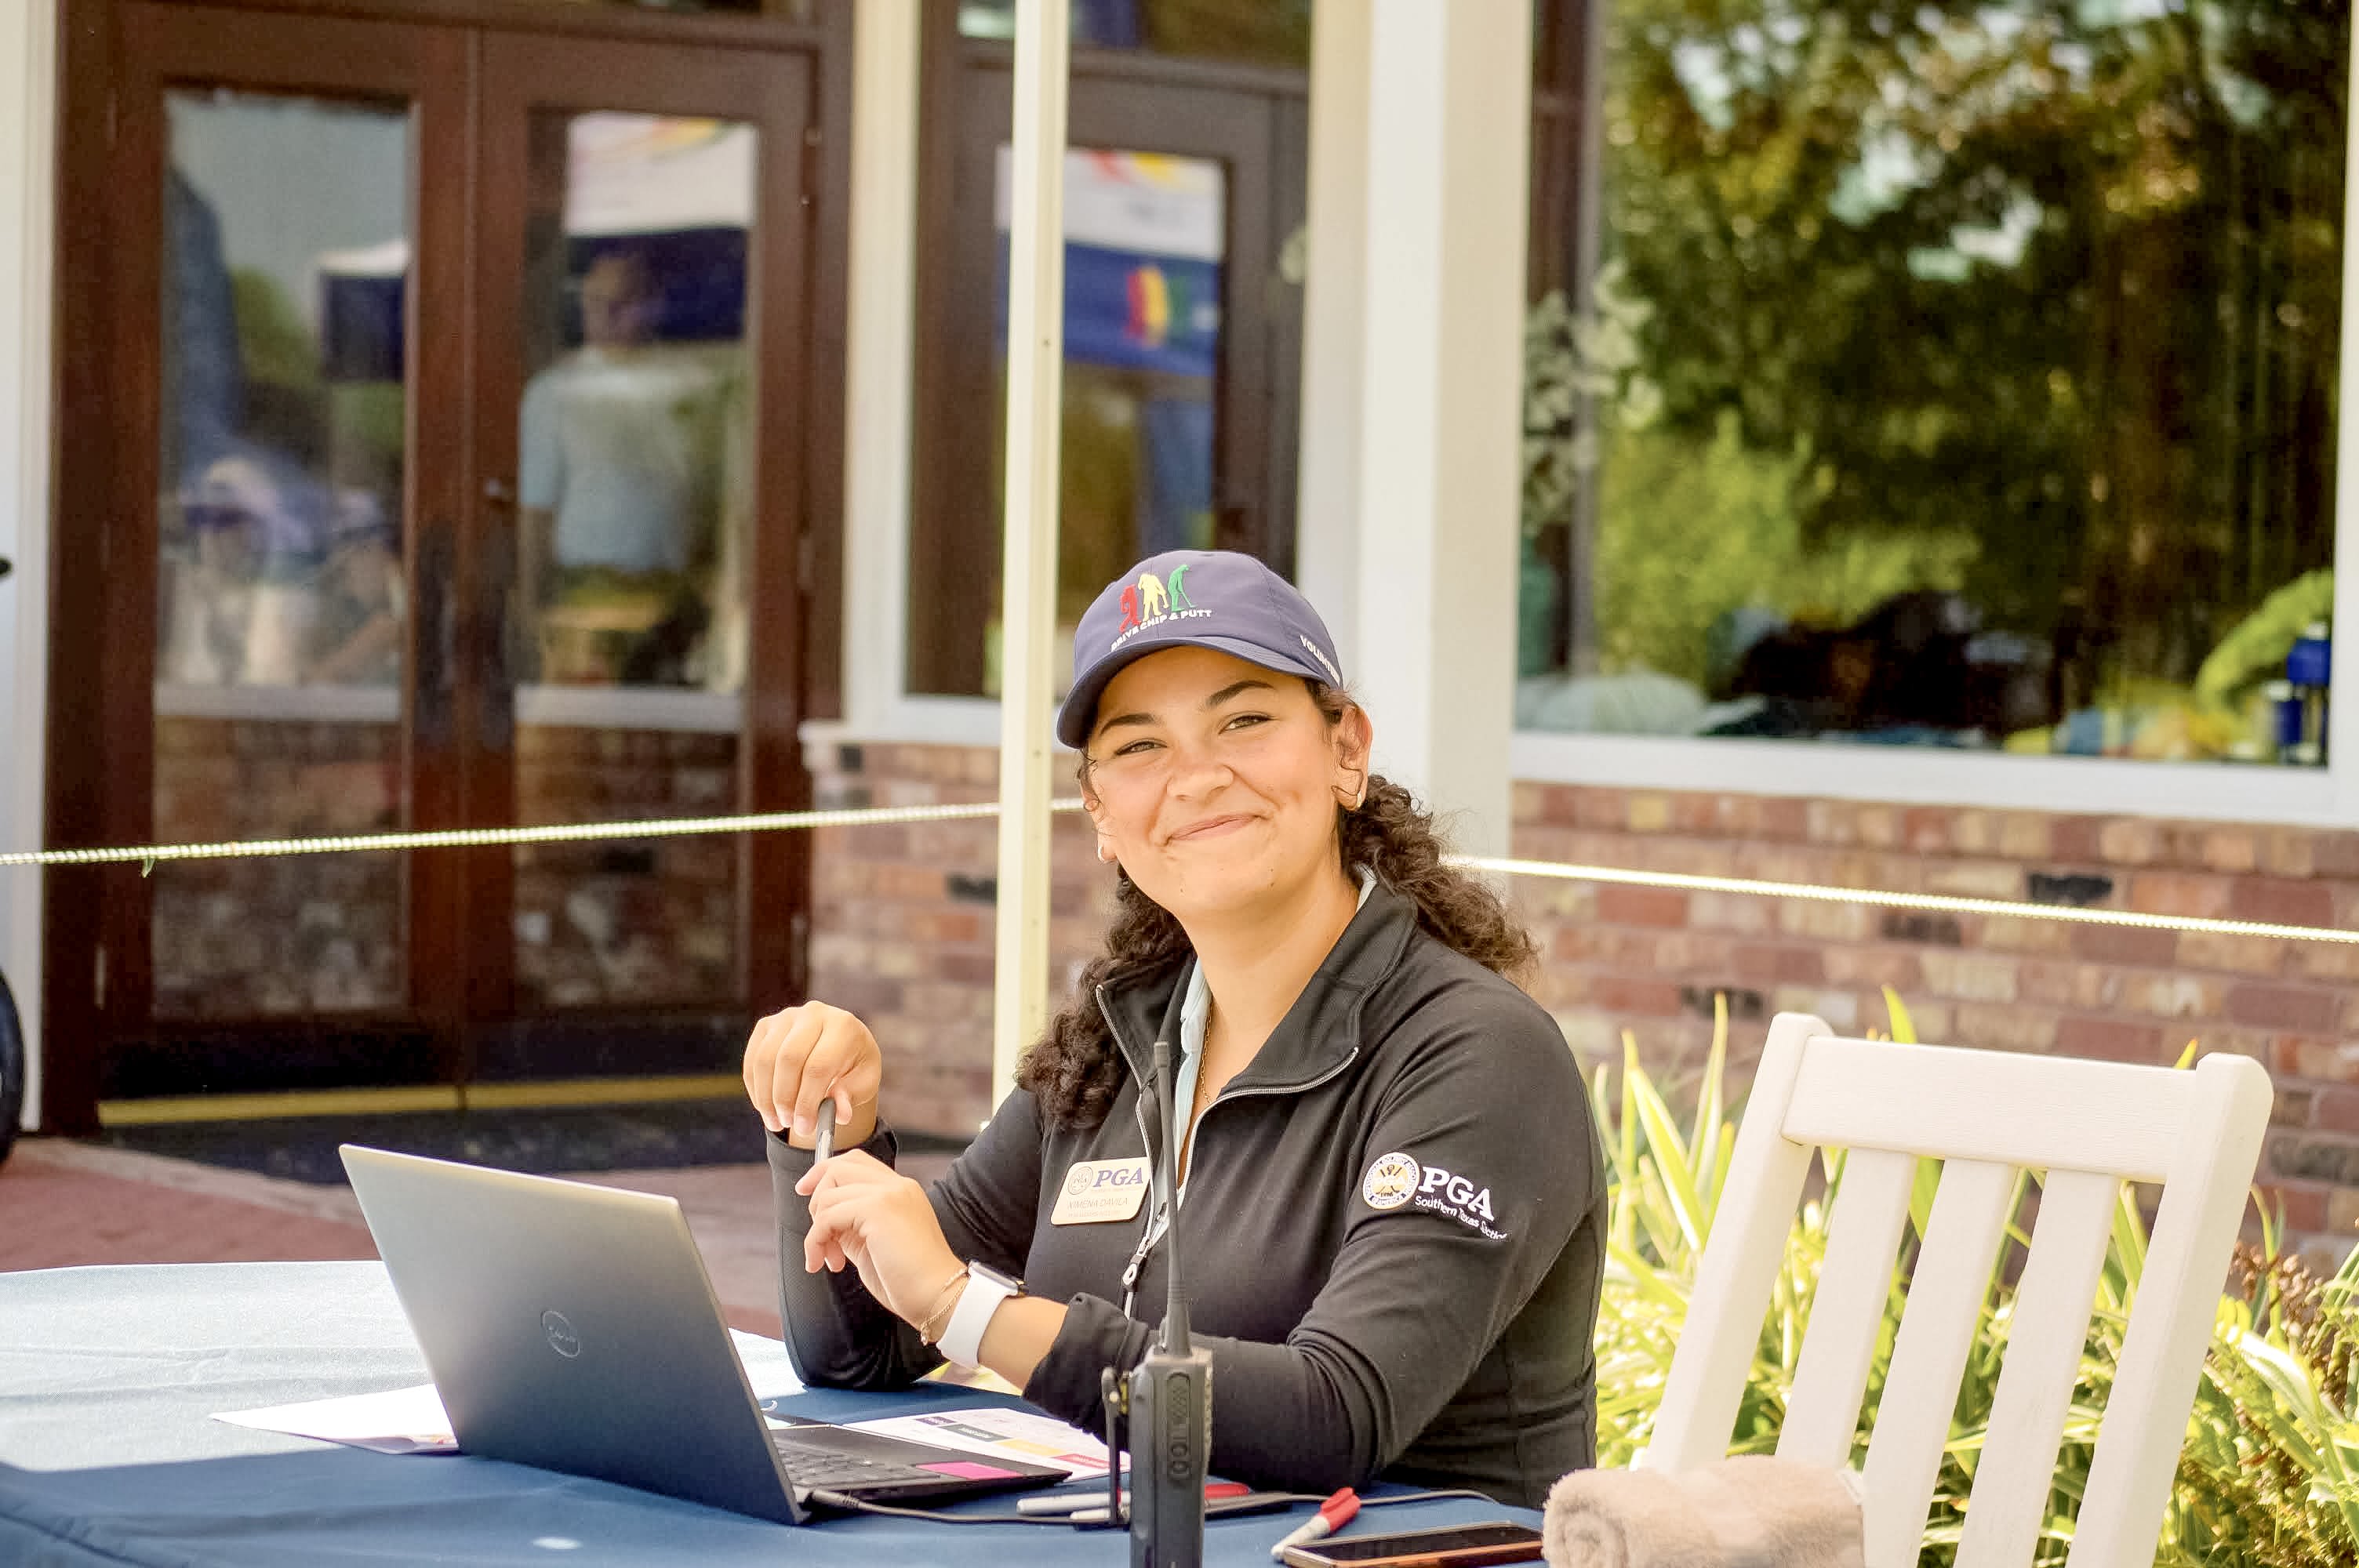 As a PGA WORKS Fellow, Davila helps the Southern Texas PGA operations team with several events, like last year's Drive, Chip and Putt Regional at Champions Golf Club.